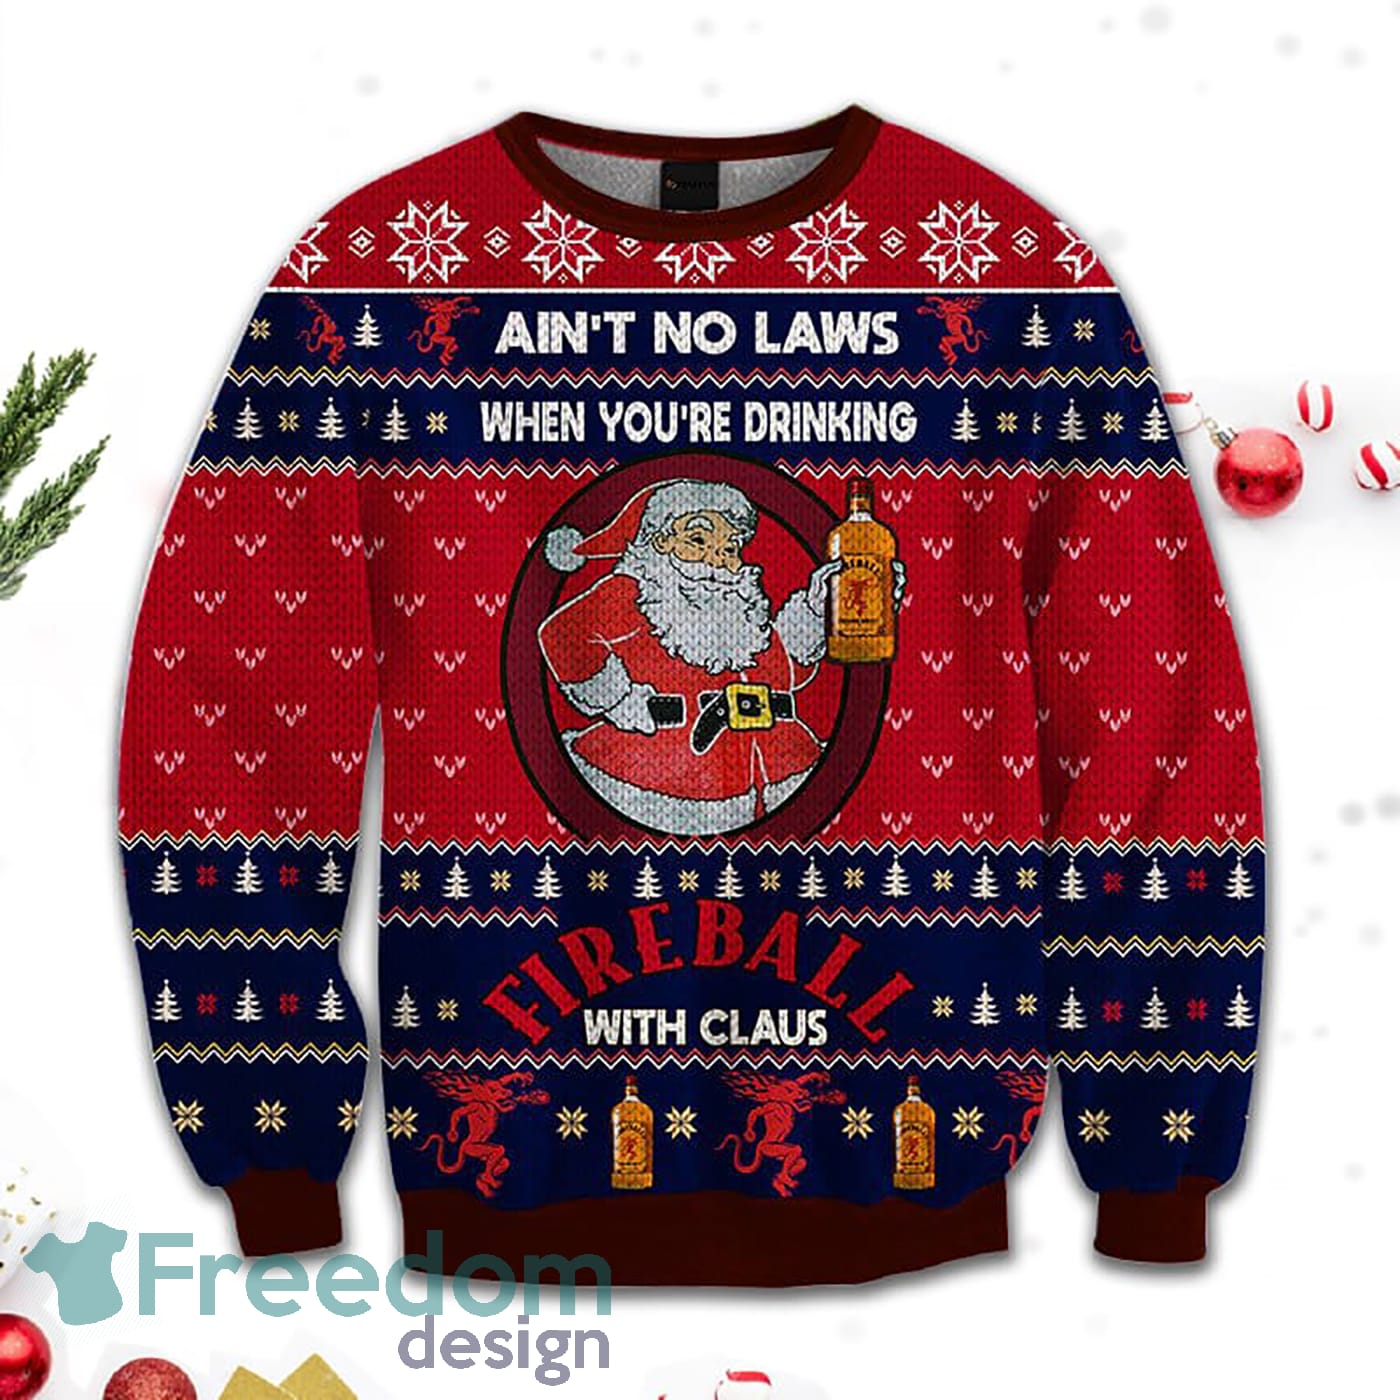 Merr Christmas Ain't No Laws When You Drink Fireball Cinnamon Whisky With Claus Sweatshirt